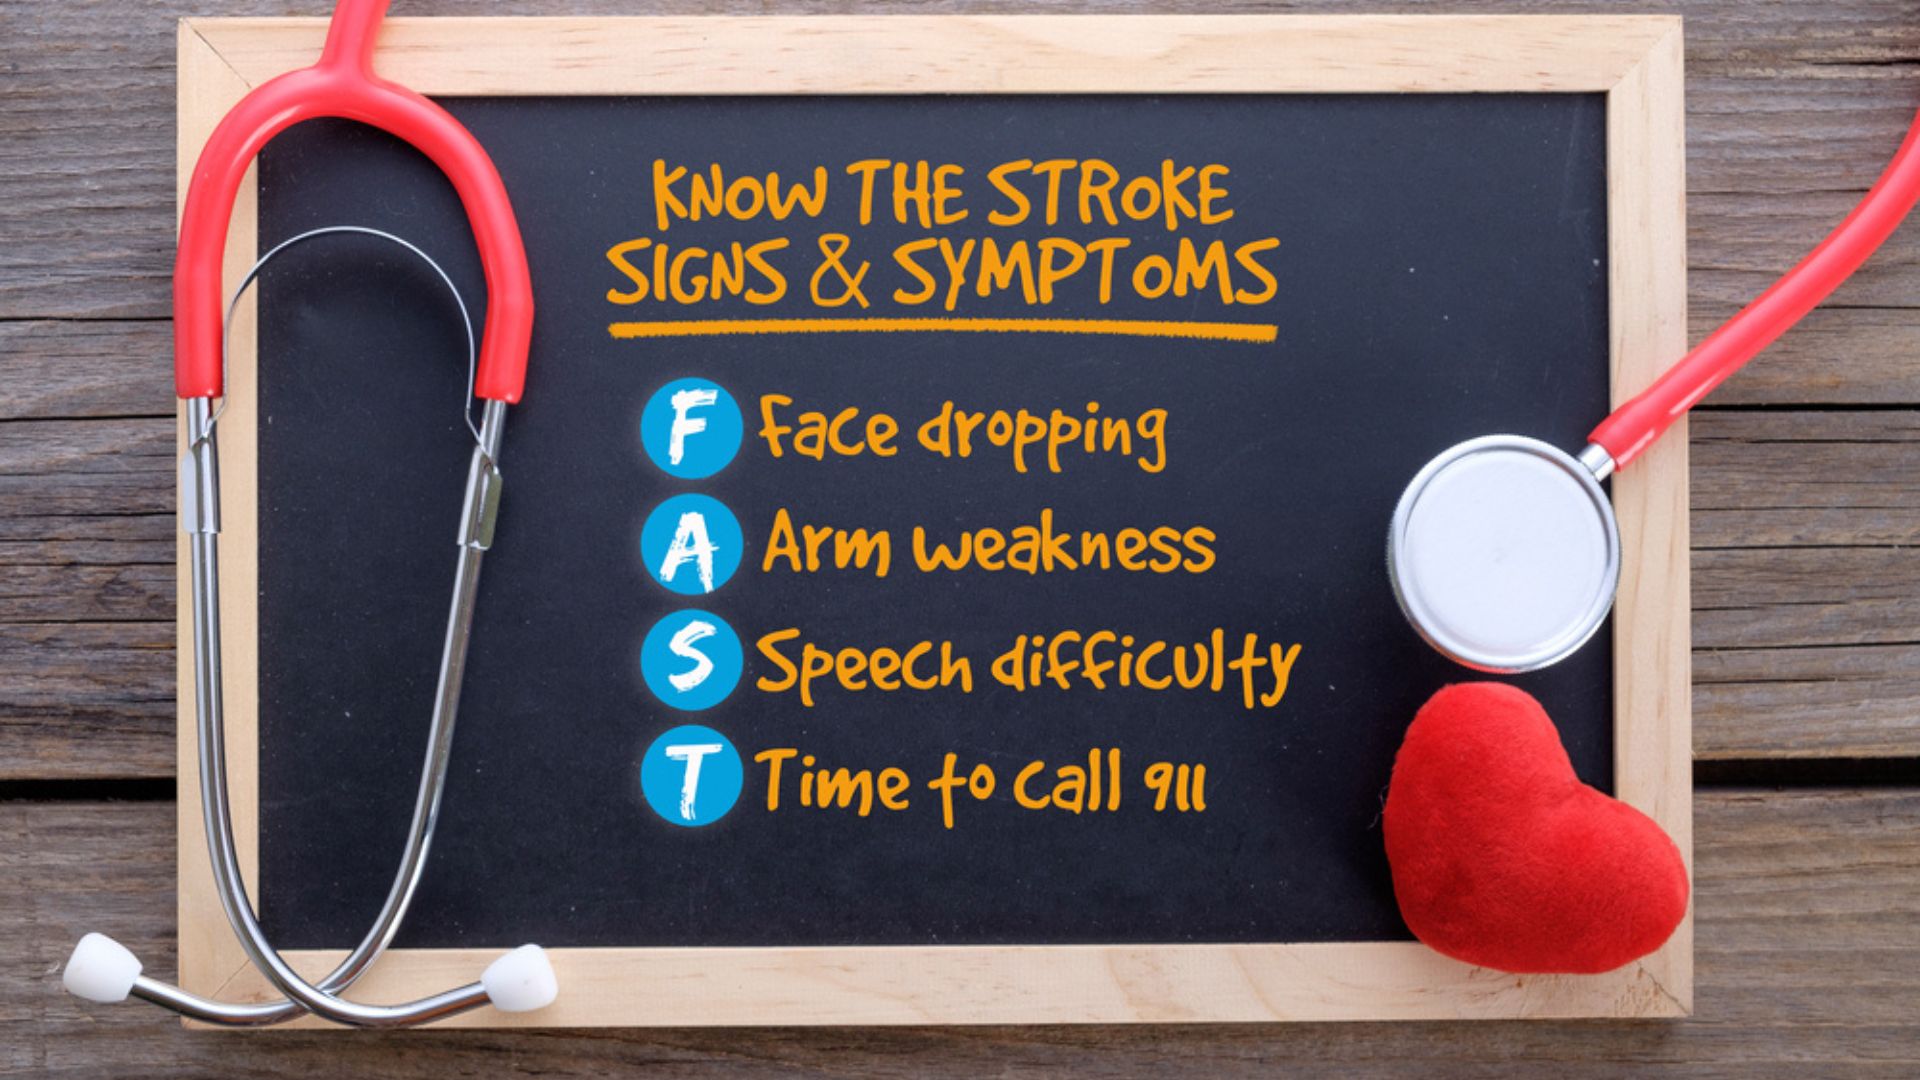 7 Common Stroke Mimics That Look Like You're Having a Stroke